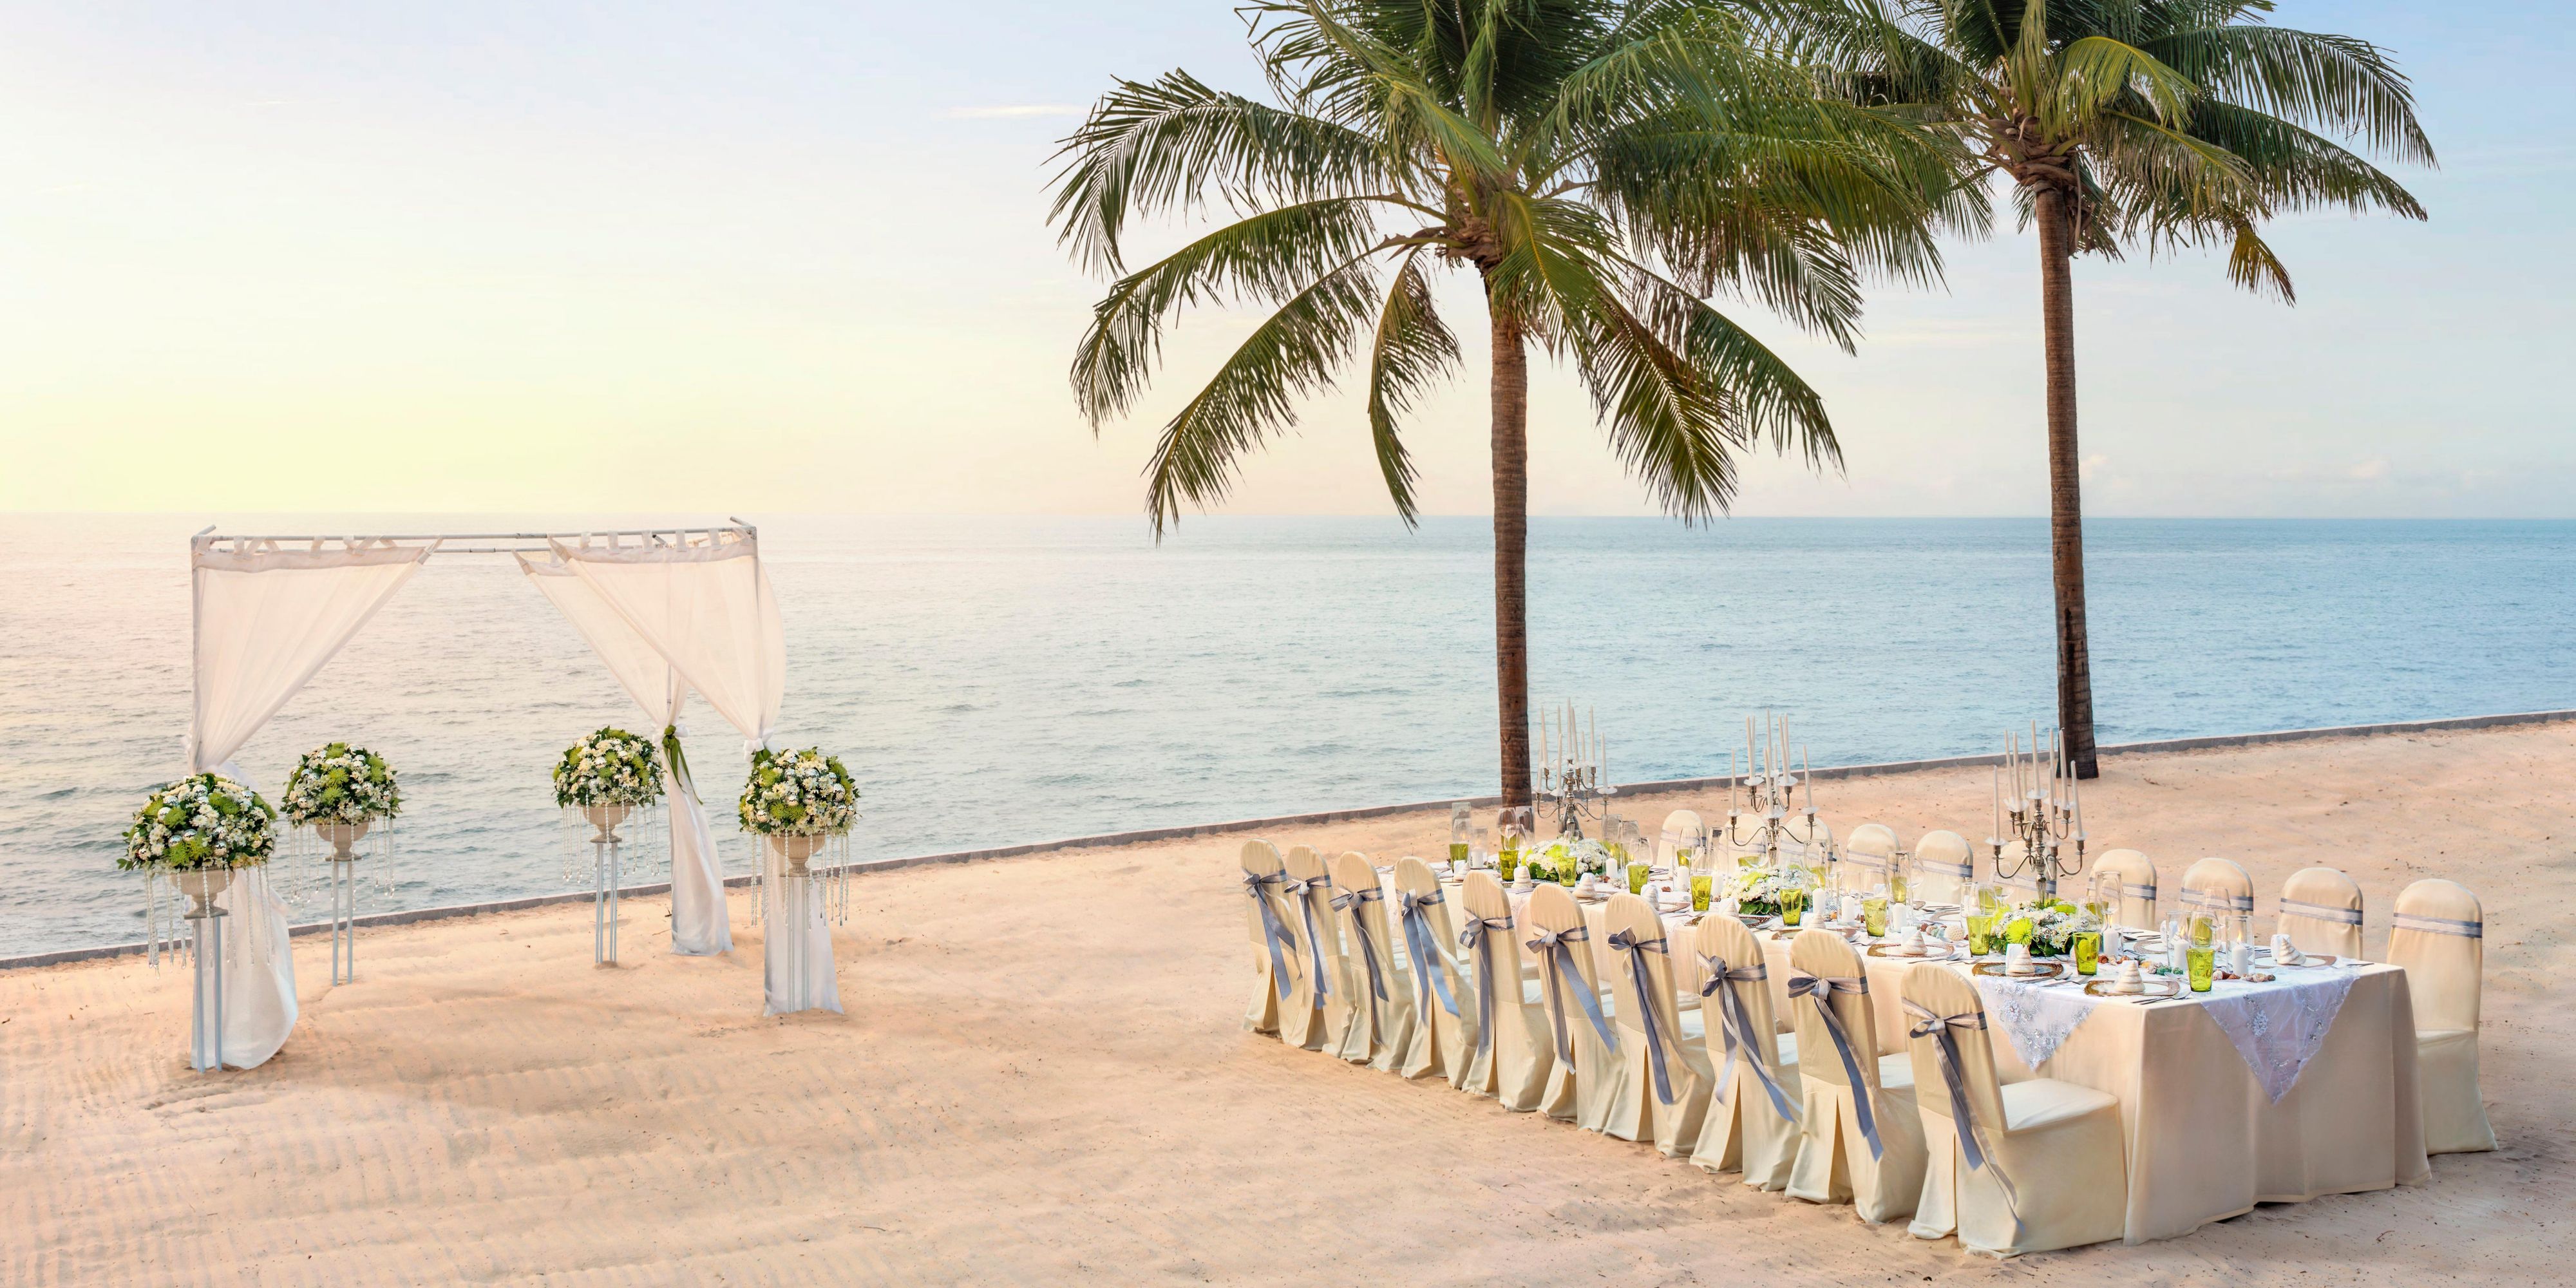 Bring your dream beach wedding to life. Our attentive wedding specialists will curate and personalise a magical event for your lifetime memories. Choose your mesmerising settings from picturesque ocean view background or a romantic indoor ambience. Your bespoke wedding awaits here. 